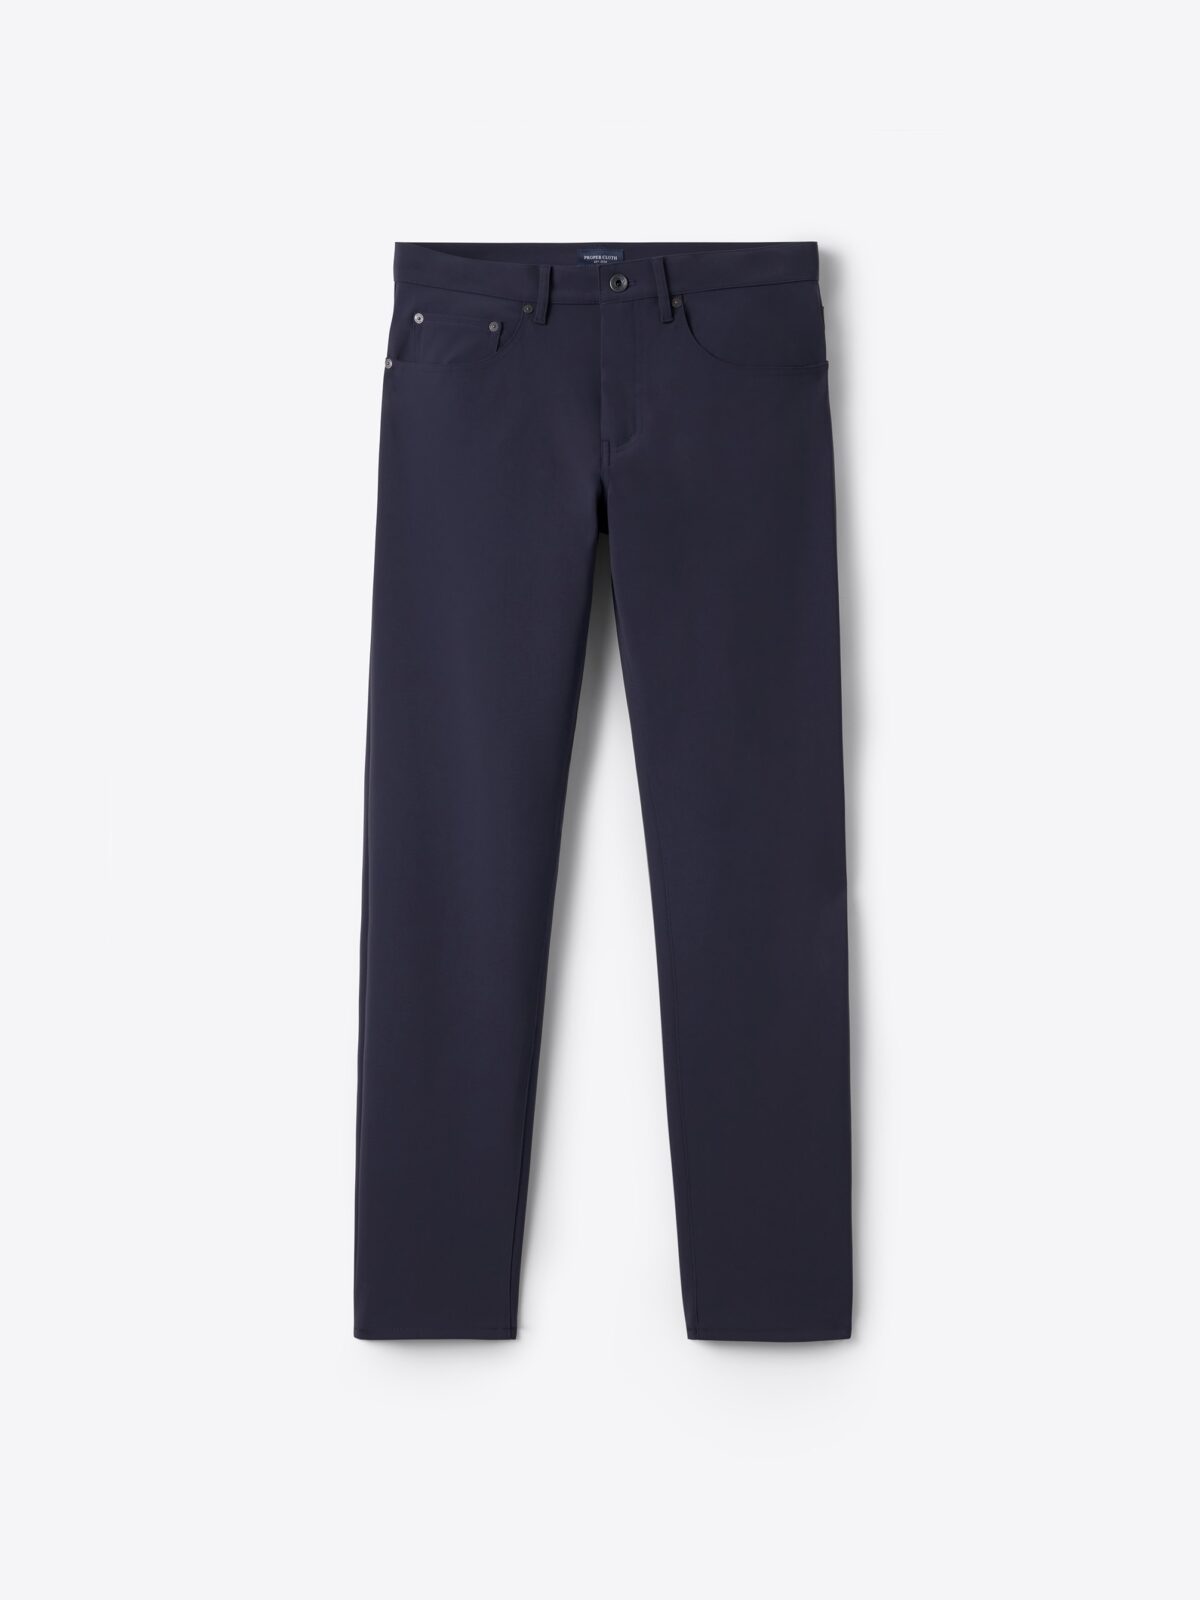 Essential Stretch Twill Pant | Goodlife Navy